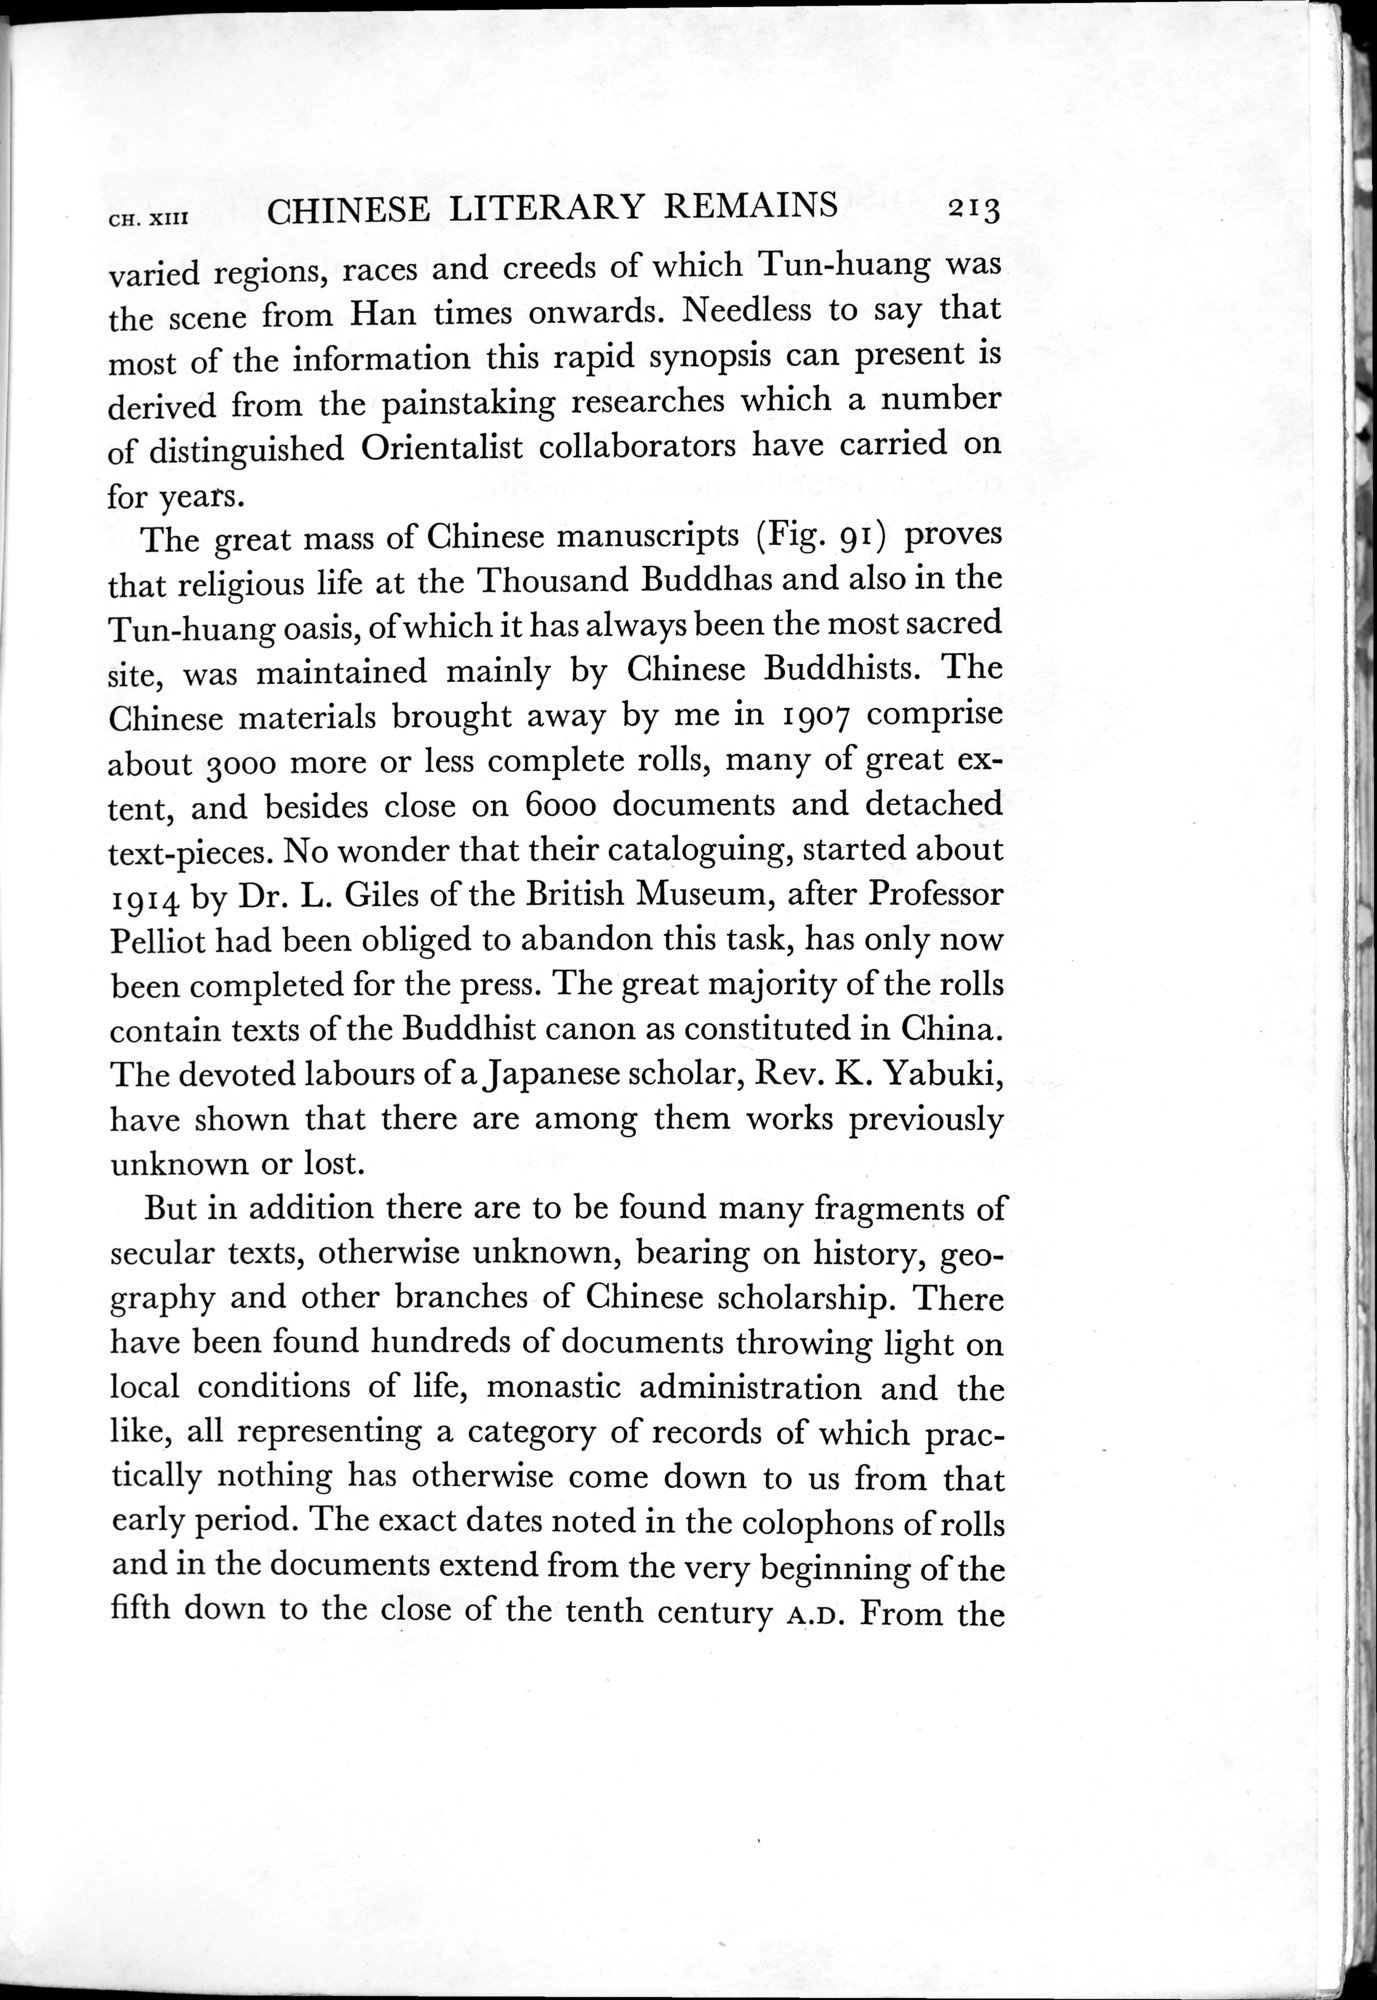 On Ancient Central-Asian Tracks : vol.1 / Page 359 (Grayscale High Resolution Image)